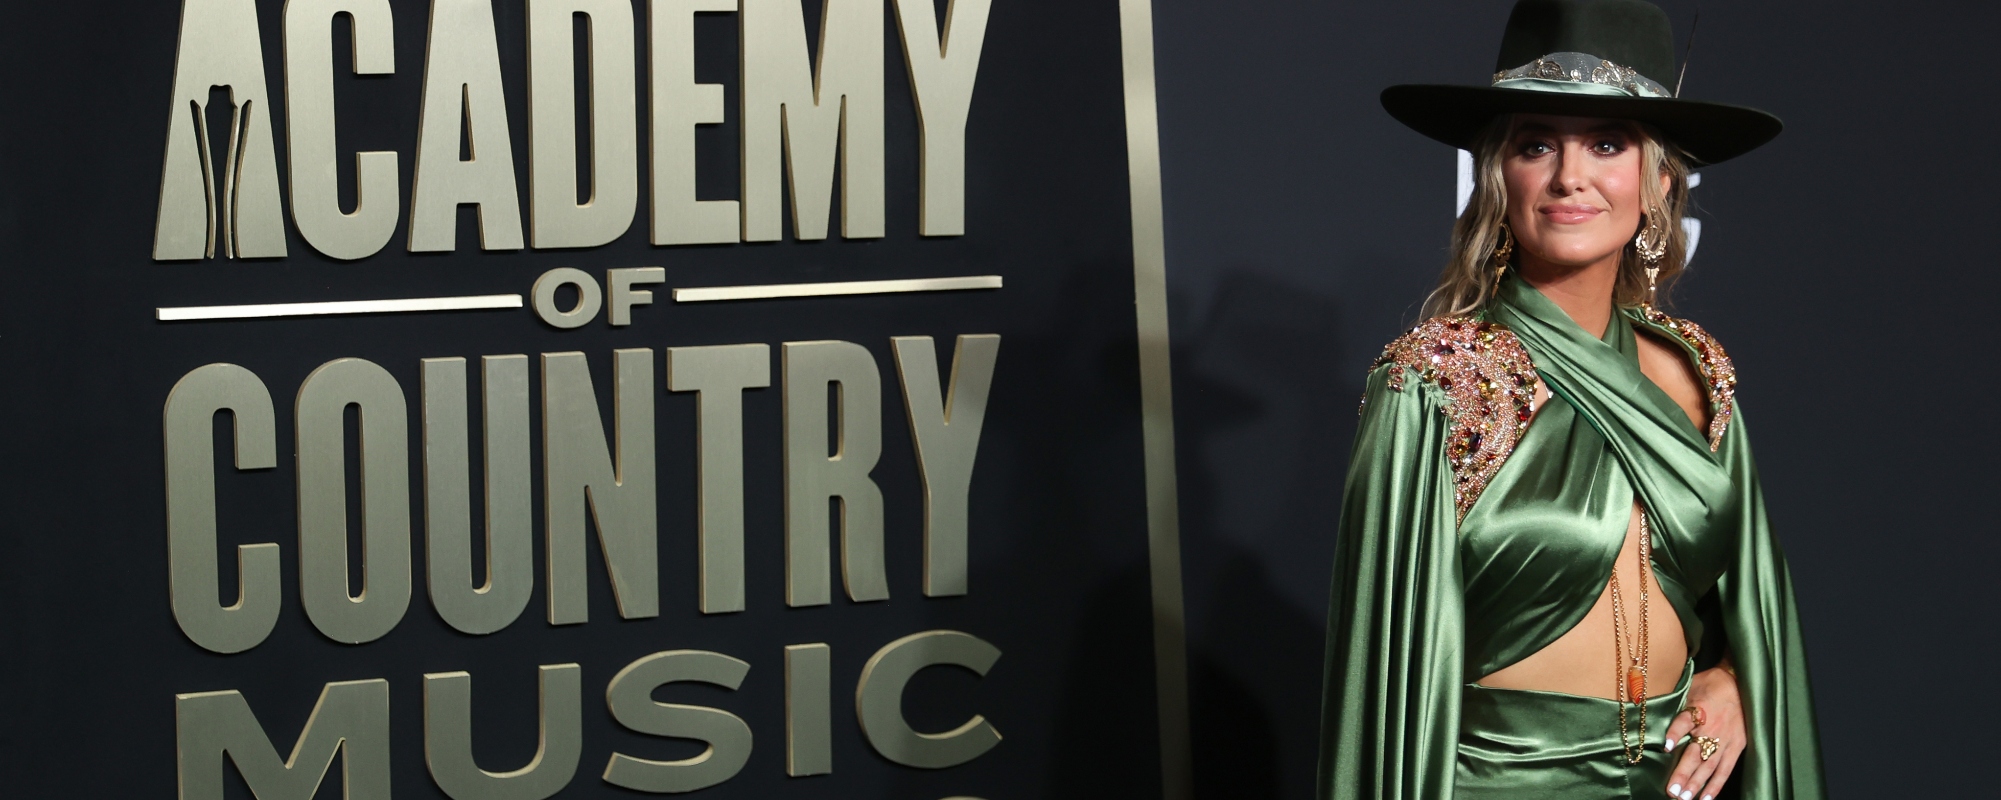 Academy of Country Music Makes Changes to Its Awards, Including Categories and Eligibility